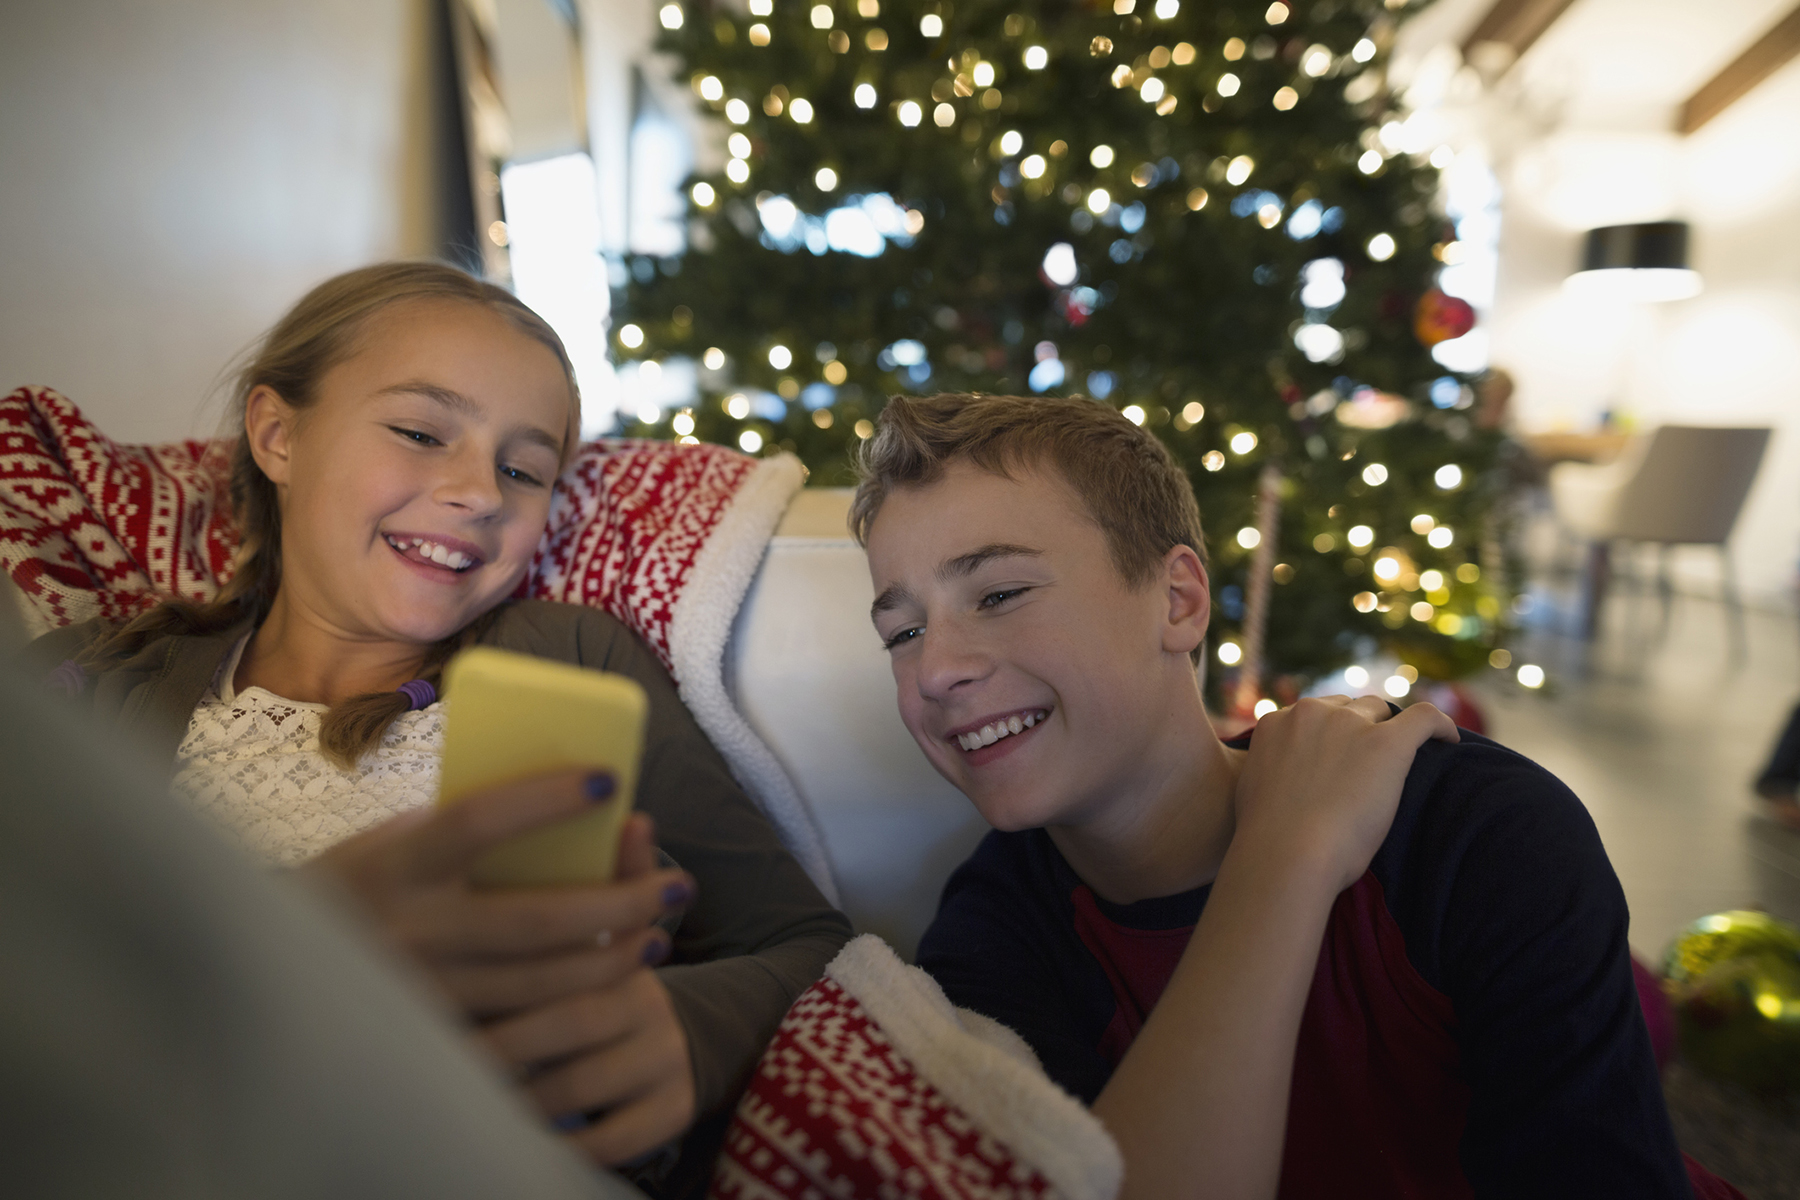 Ways to get the family to use tech less over the holiday